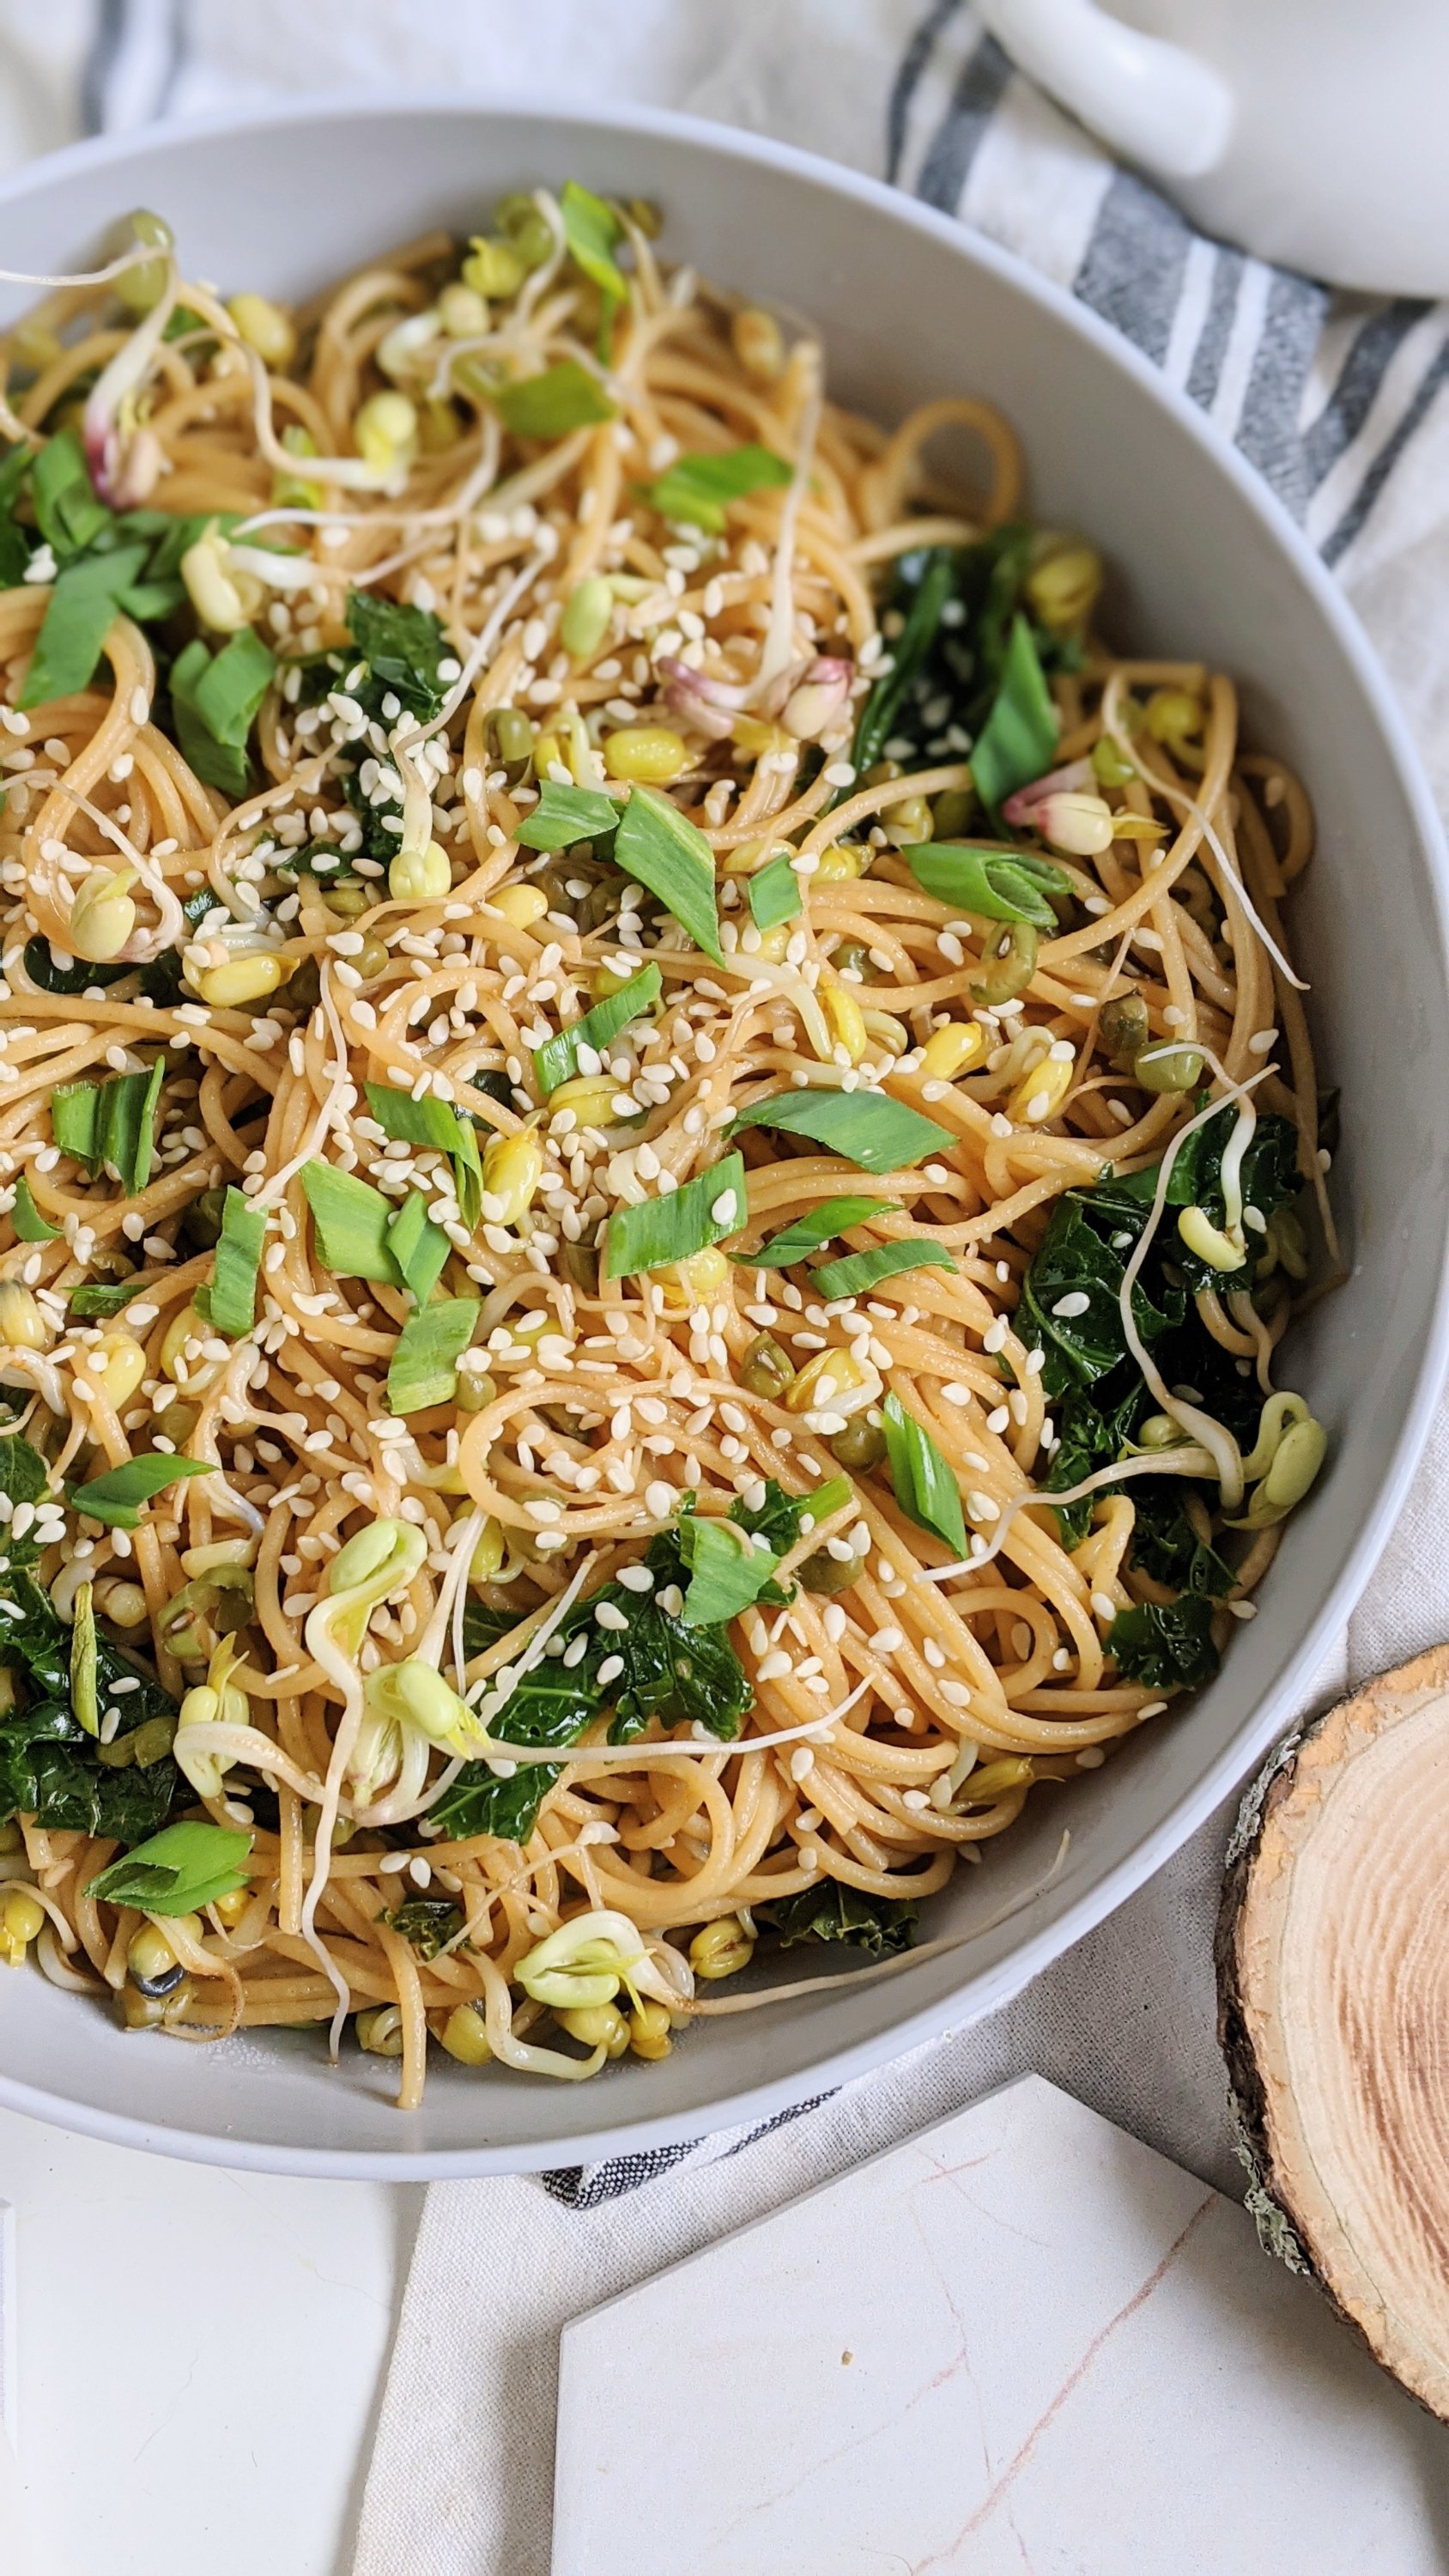 kale garlic noodles with bean sprouts and sesame seeds vegan gluten free vegetarian veganuary meatless monday recipes with pasta noodles